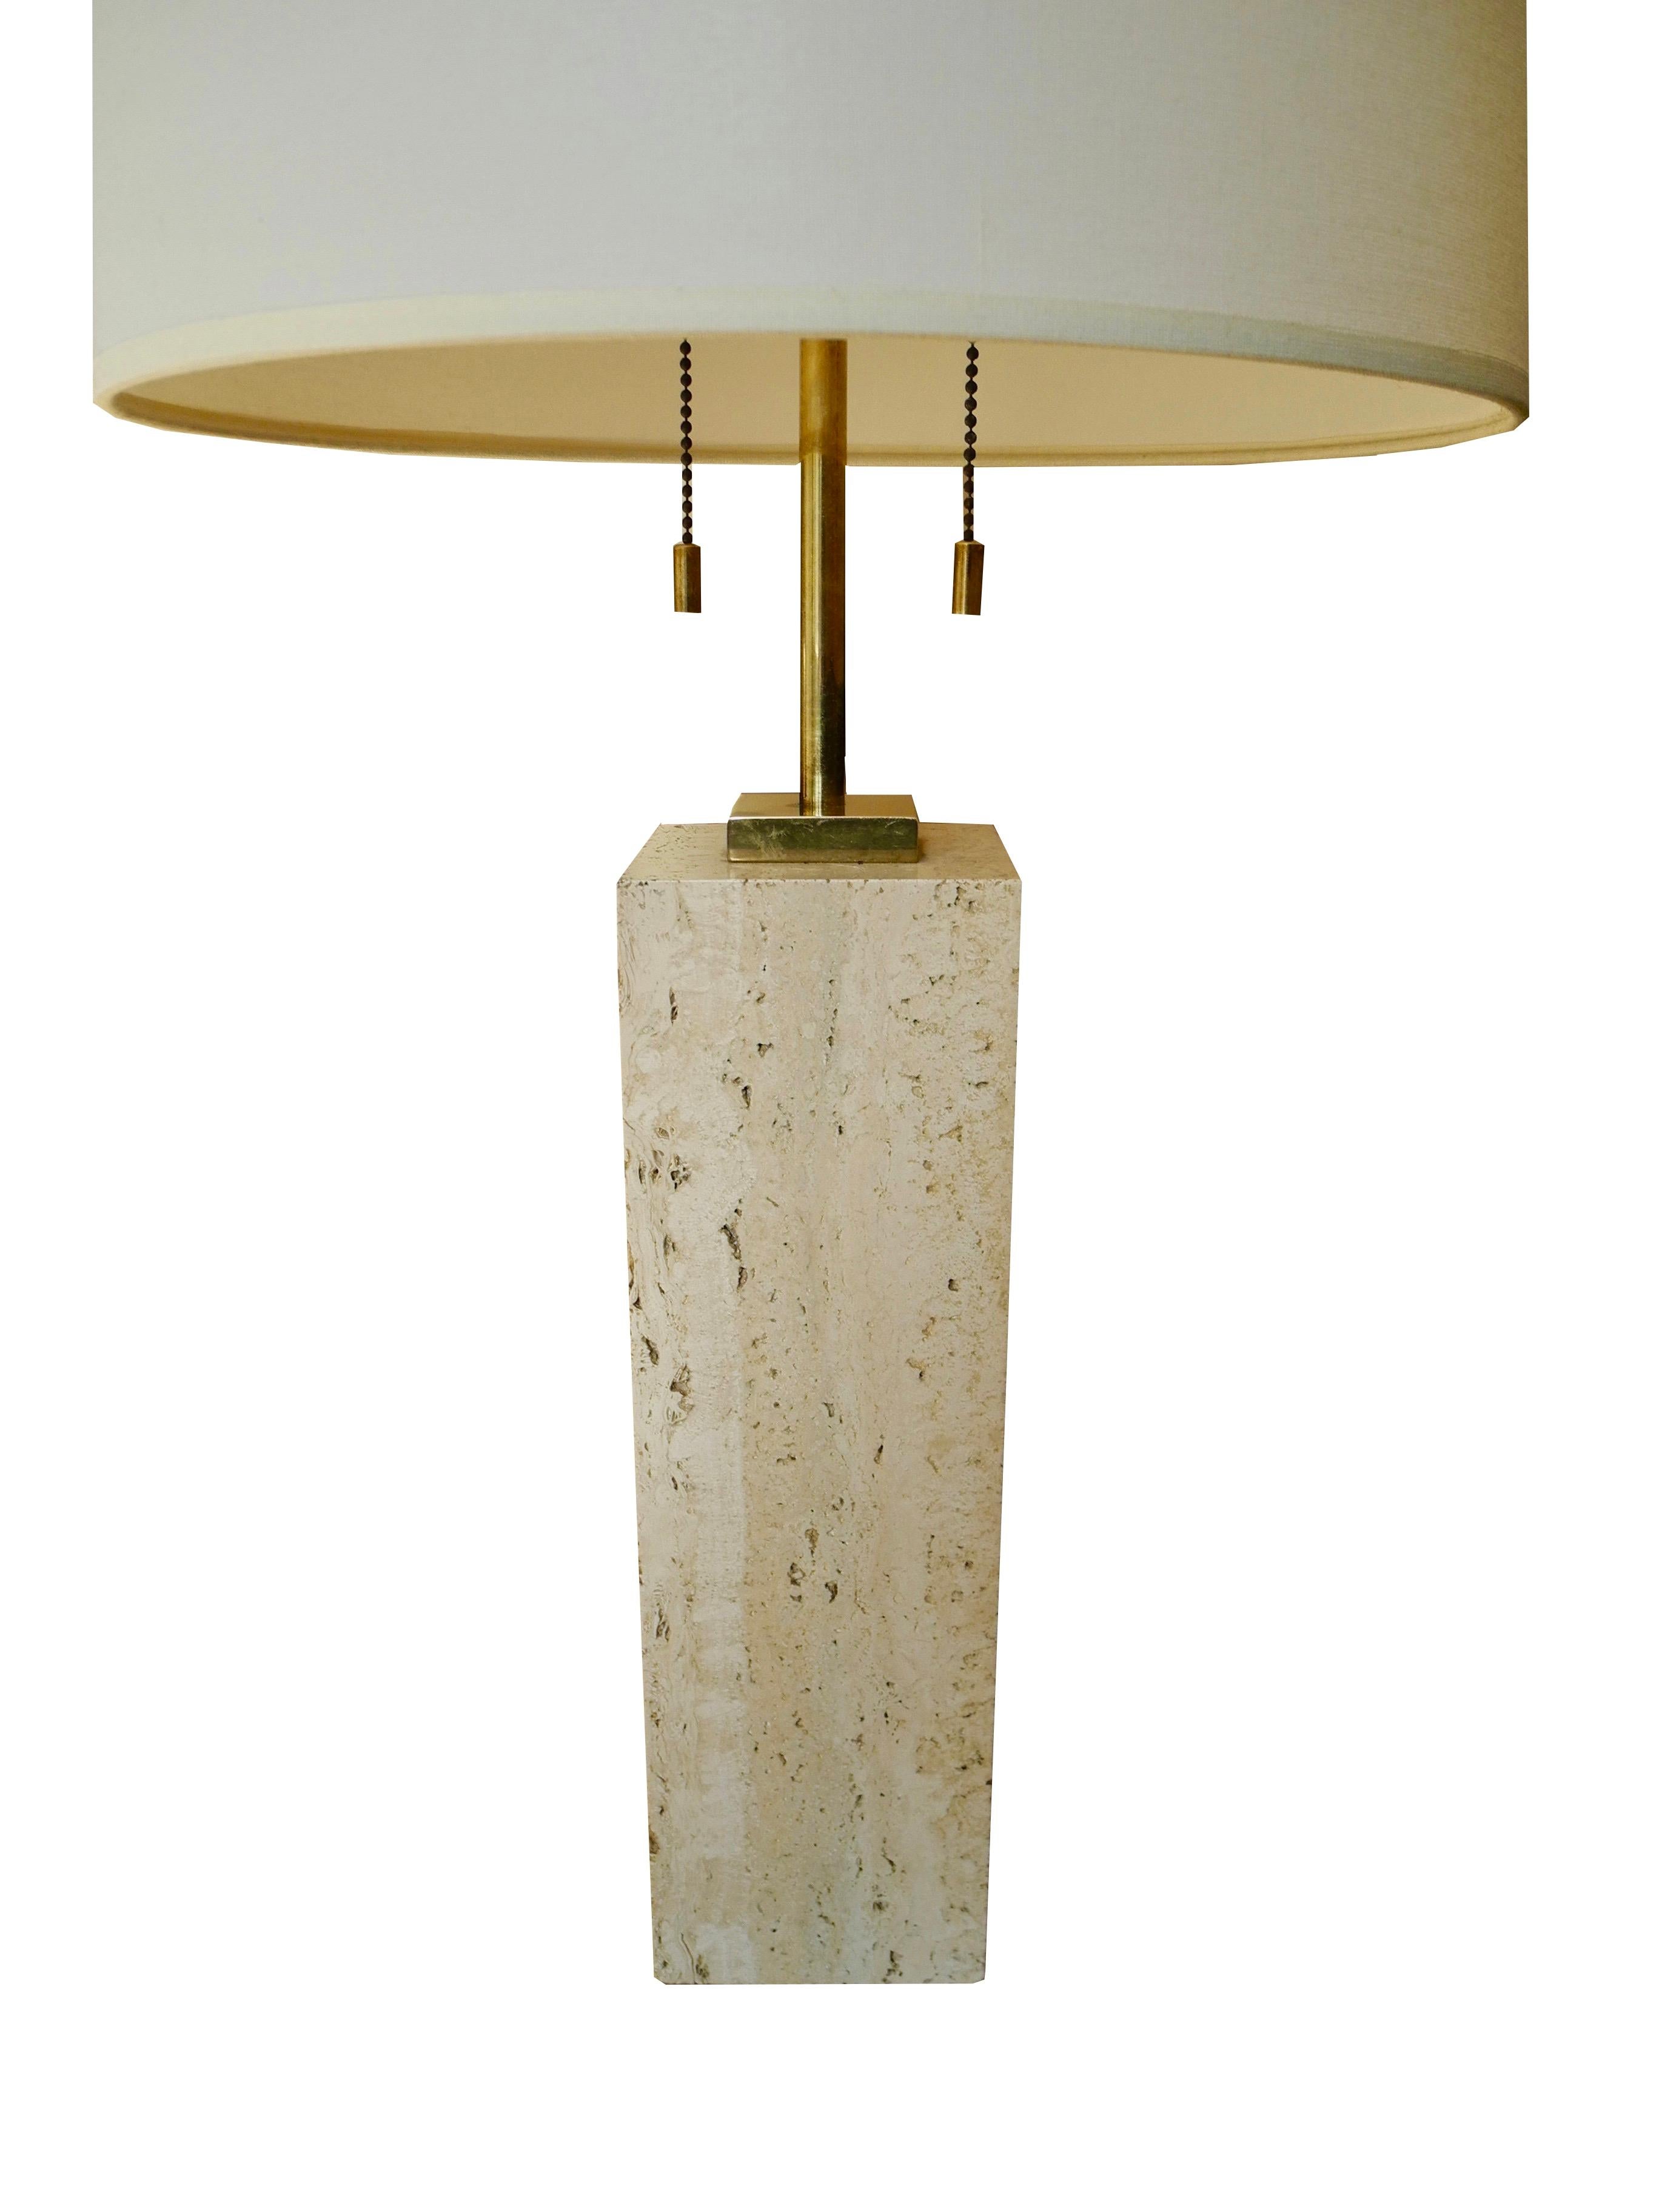 This block of solid travertine stone and brass fittings was designed by TH Robsjohn-Gibbings in the 1950s. Its design is handsome and modern. The stone measures 4 x 4 x 13.5 inches. The height to the top of the finial is 27.25